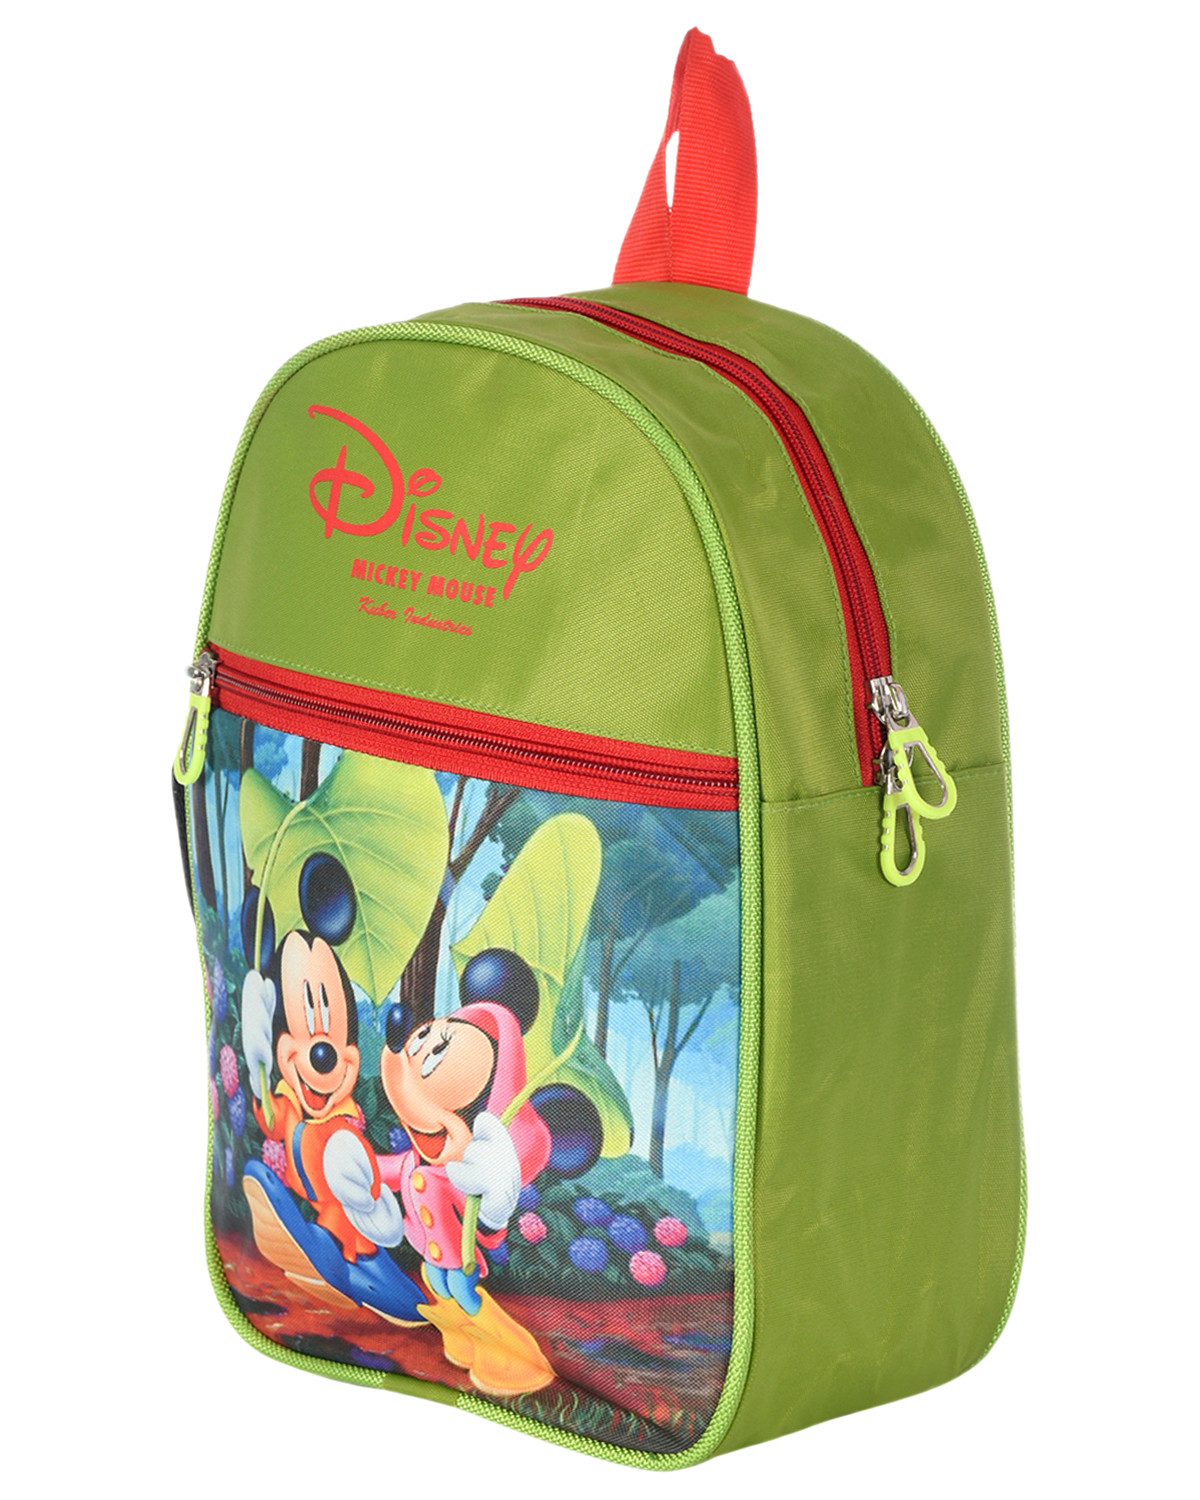 Kuber Industries Mickey & Minnie Print Kids Backpack Bag for School, Travel, Casual, Picnics (Green)